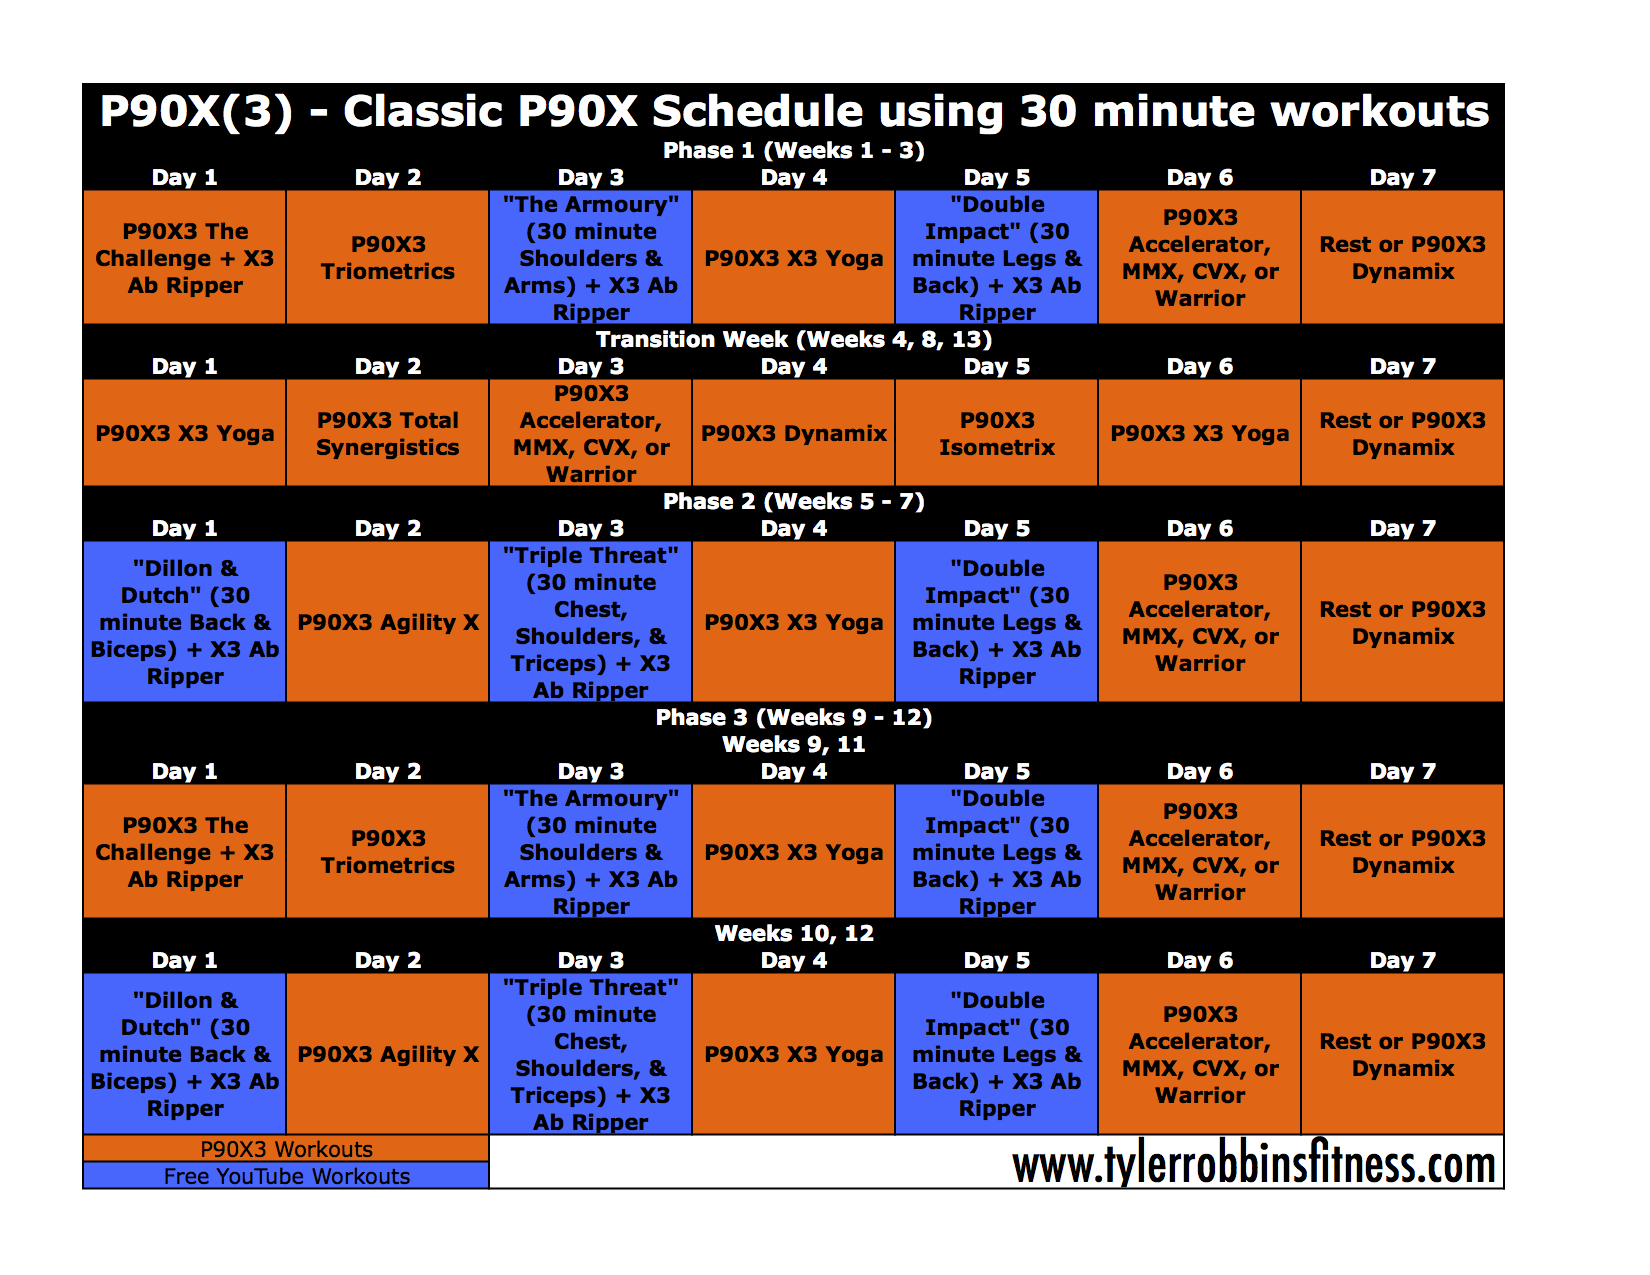 P90x3 workout P90X3 Worksheets - Get the PDF Download P90...